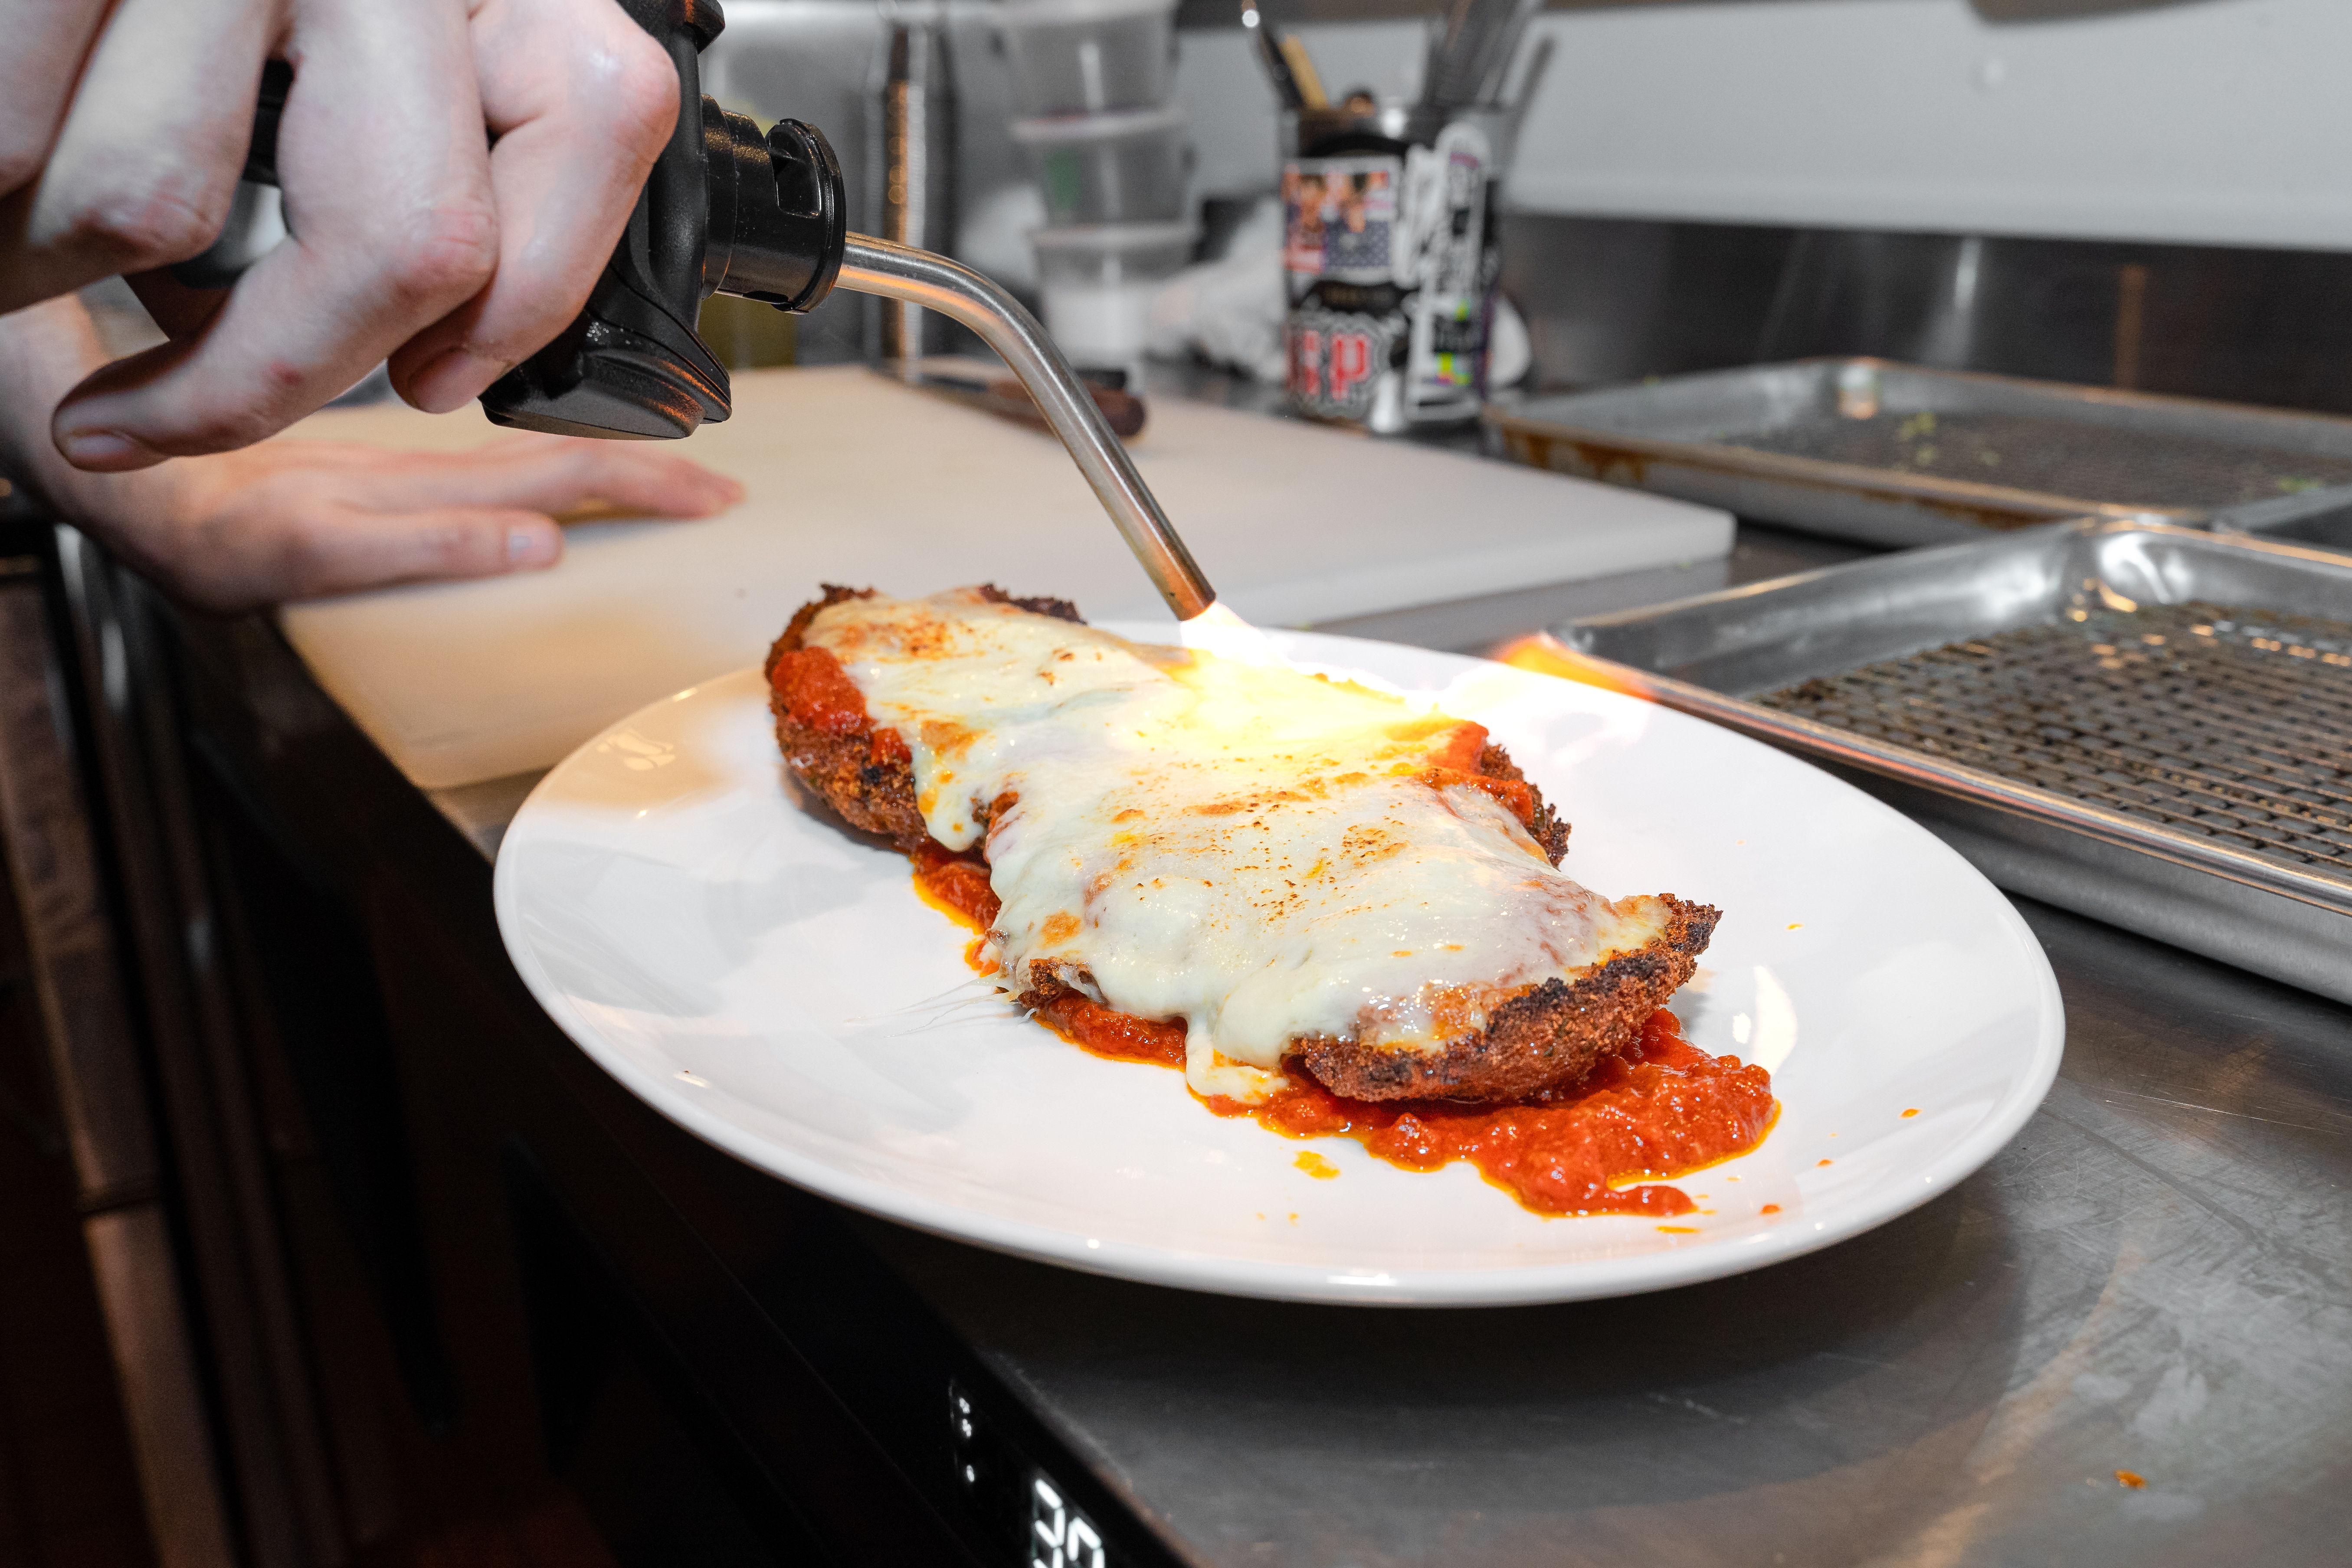 A hand holding a small kitchen blowtorch browns the cheese on top of a chicken parmigiana.